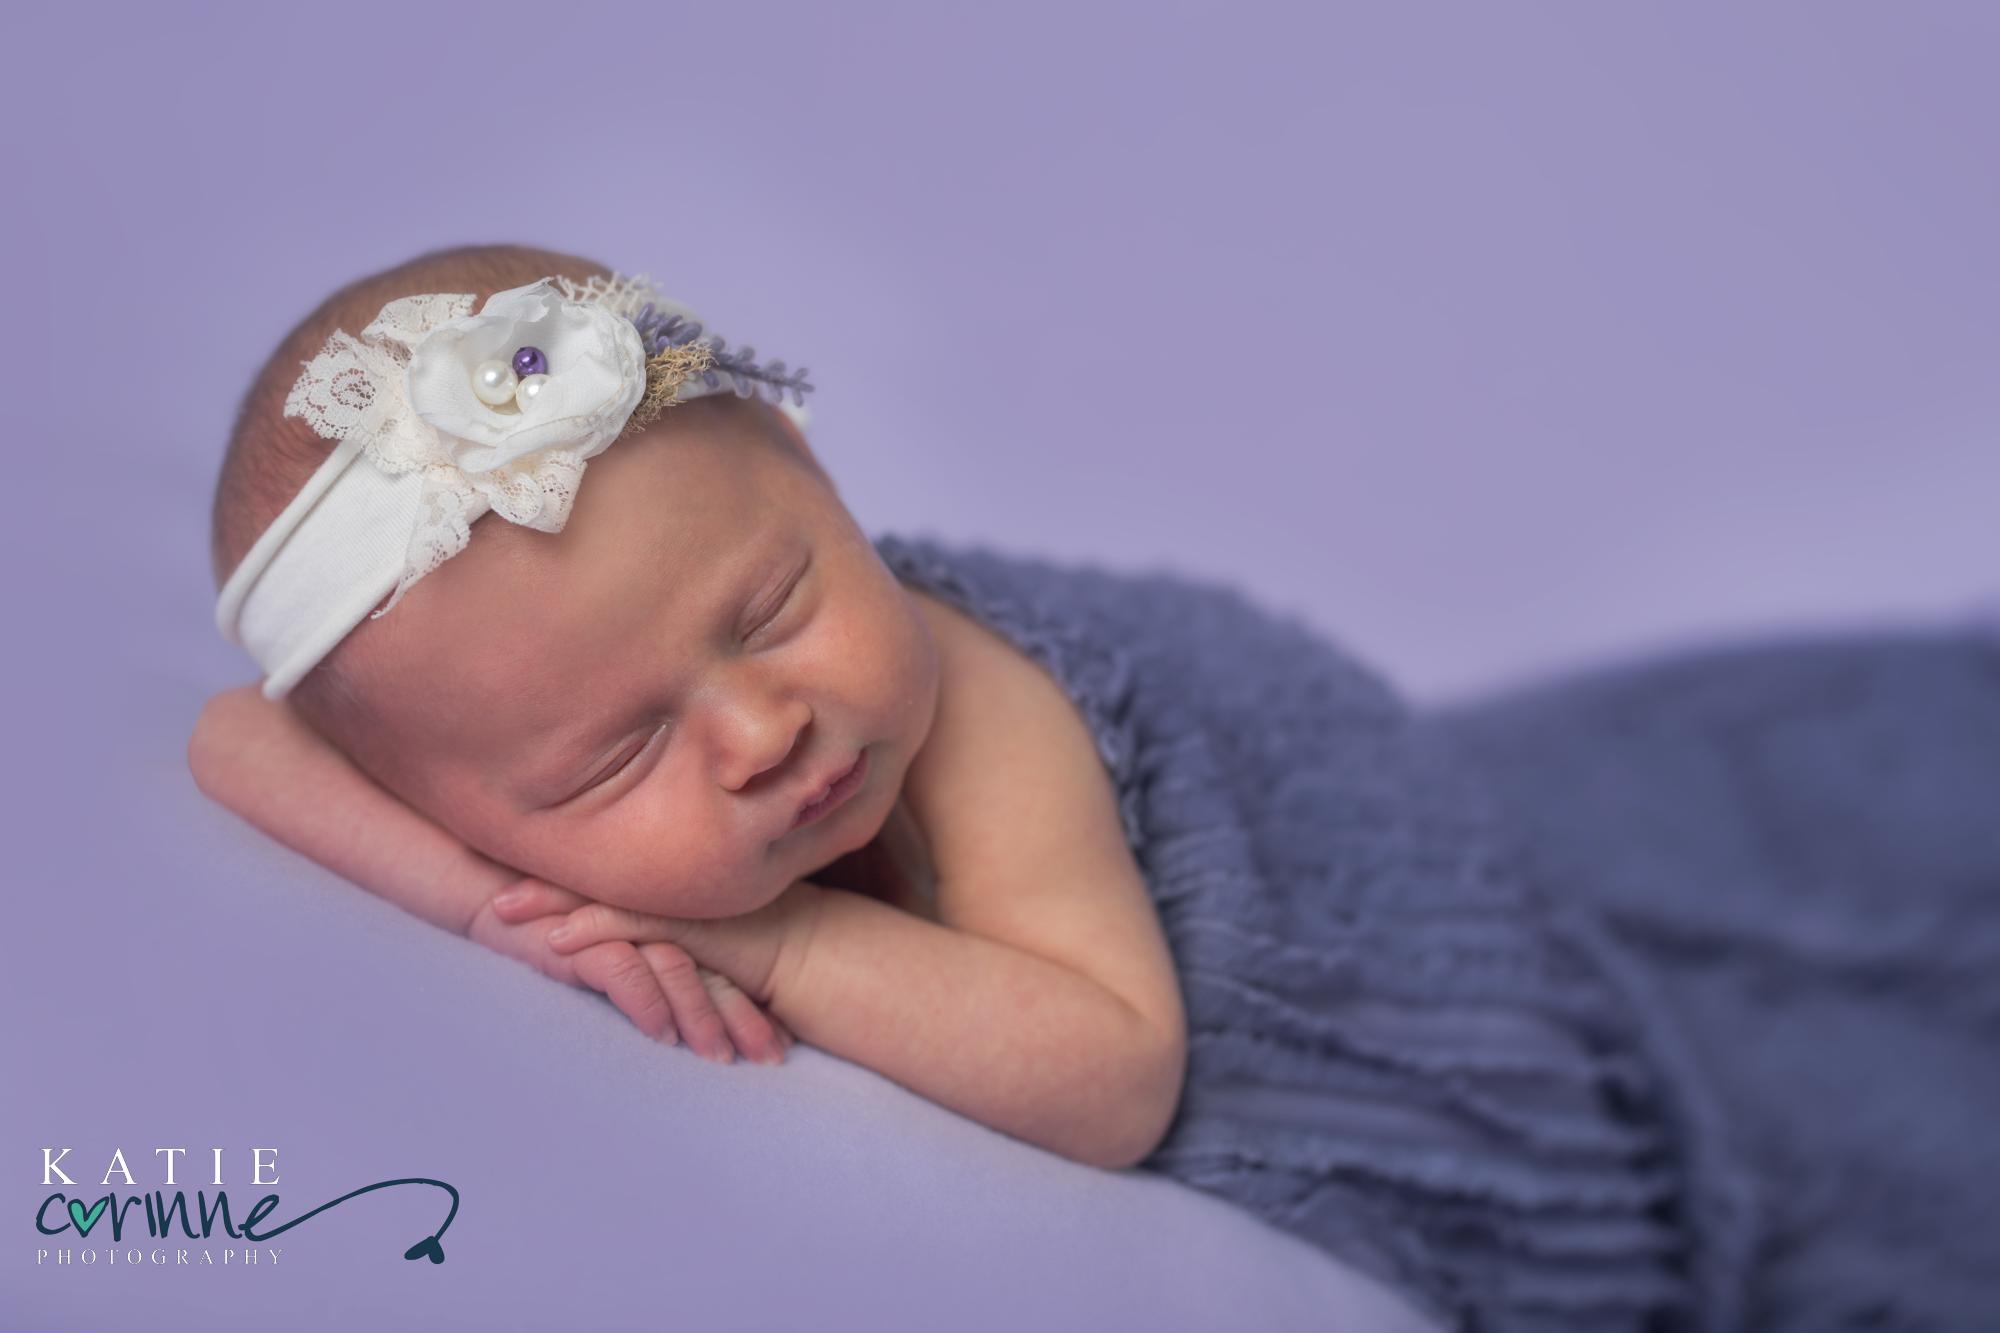 Newborn baby girl with white and purble floral headband